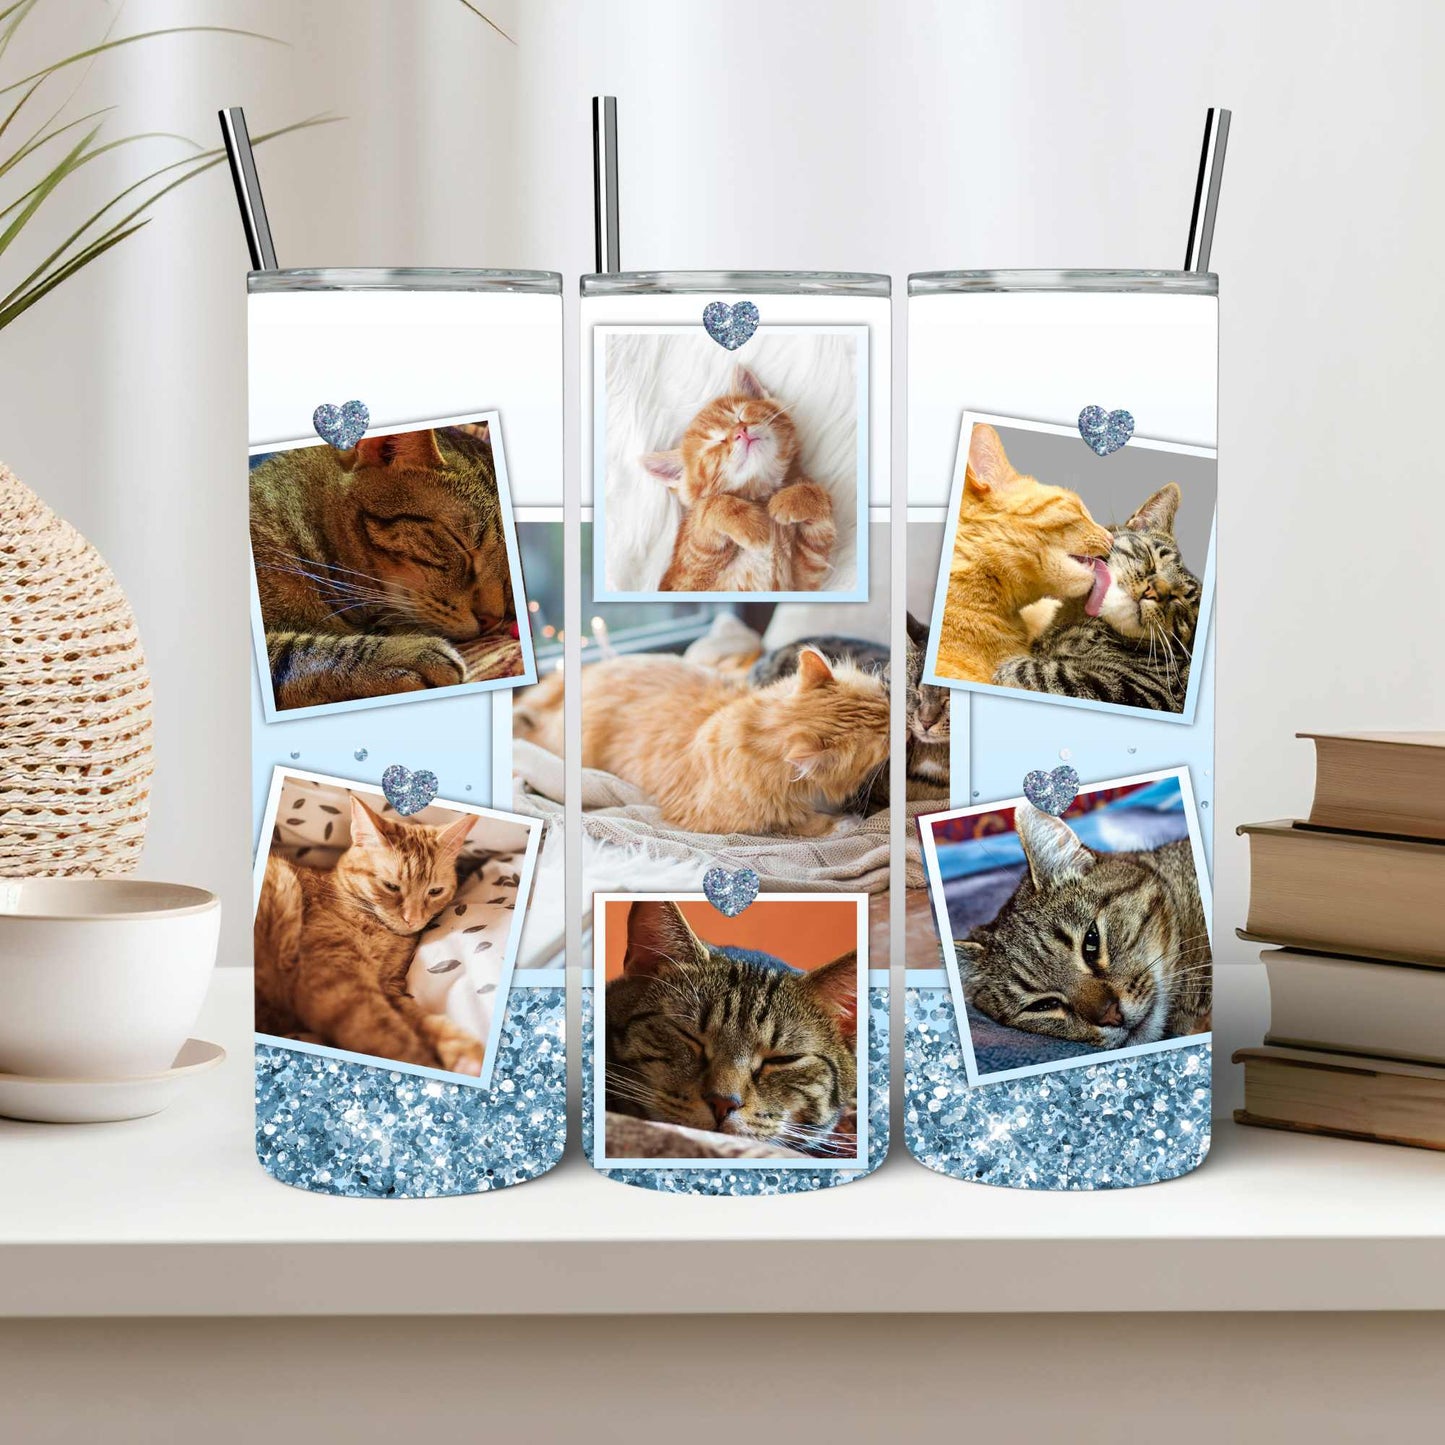 Personalised photo collage 20 oz tumbler with any name